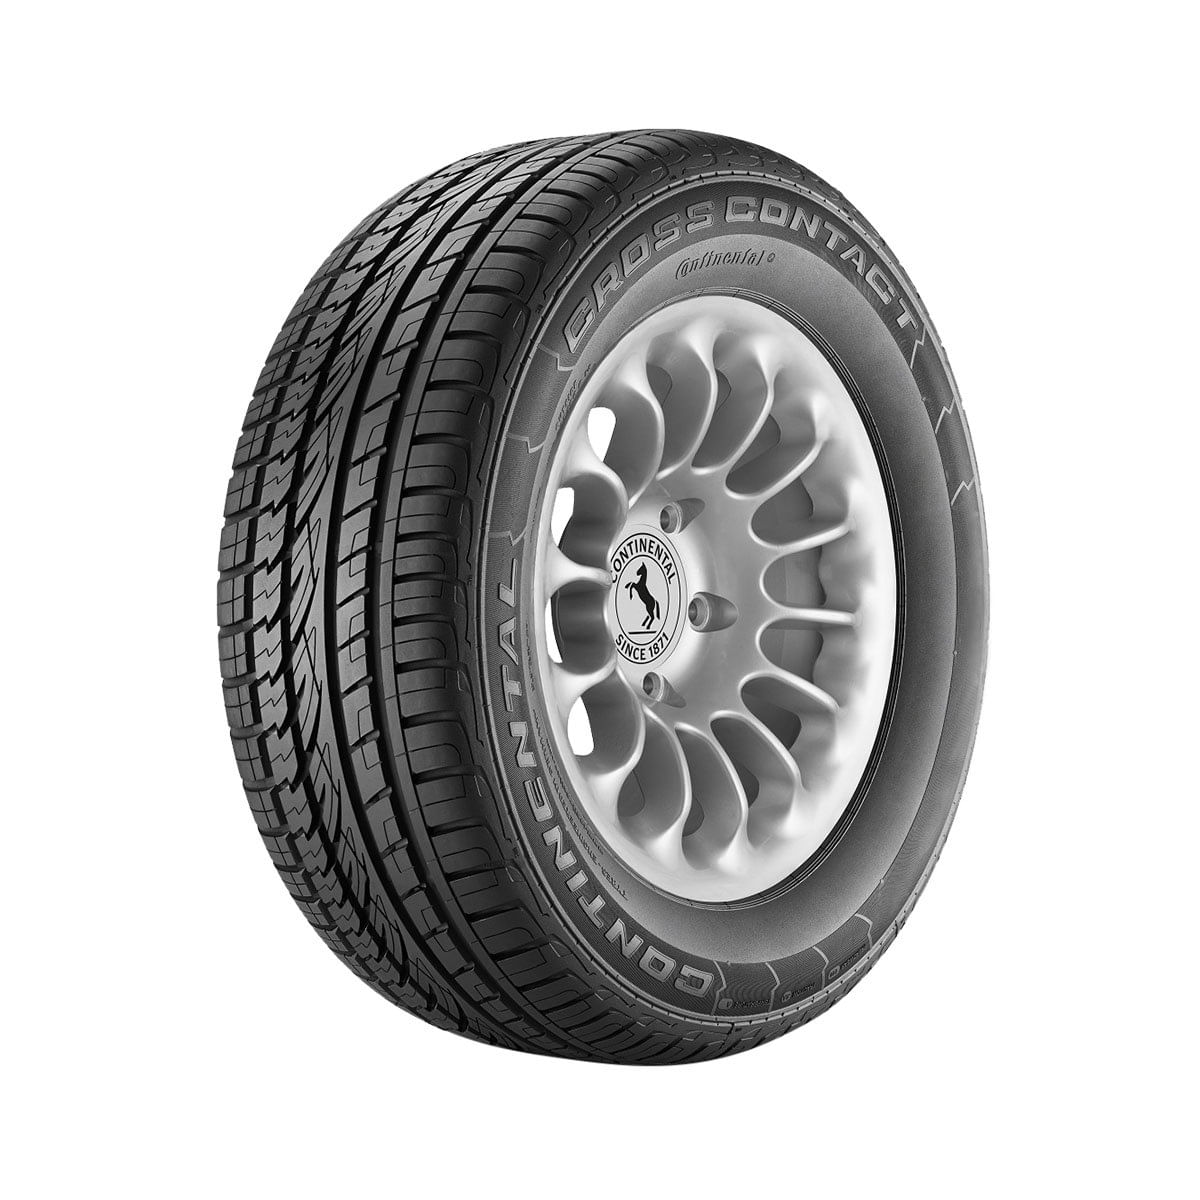 5744776_Pneu Aro 20 255/45 R 20 Continental CrossContact UHP 3548630000_1_Zoom